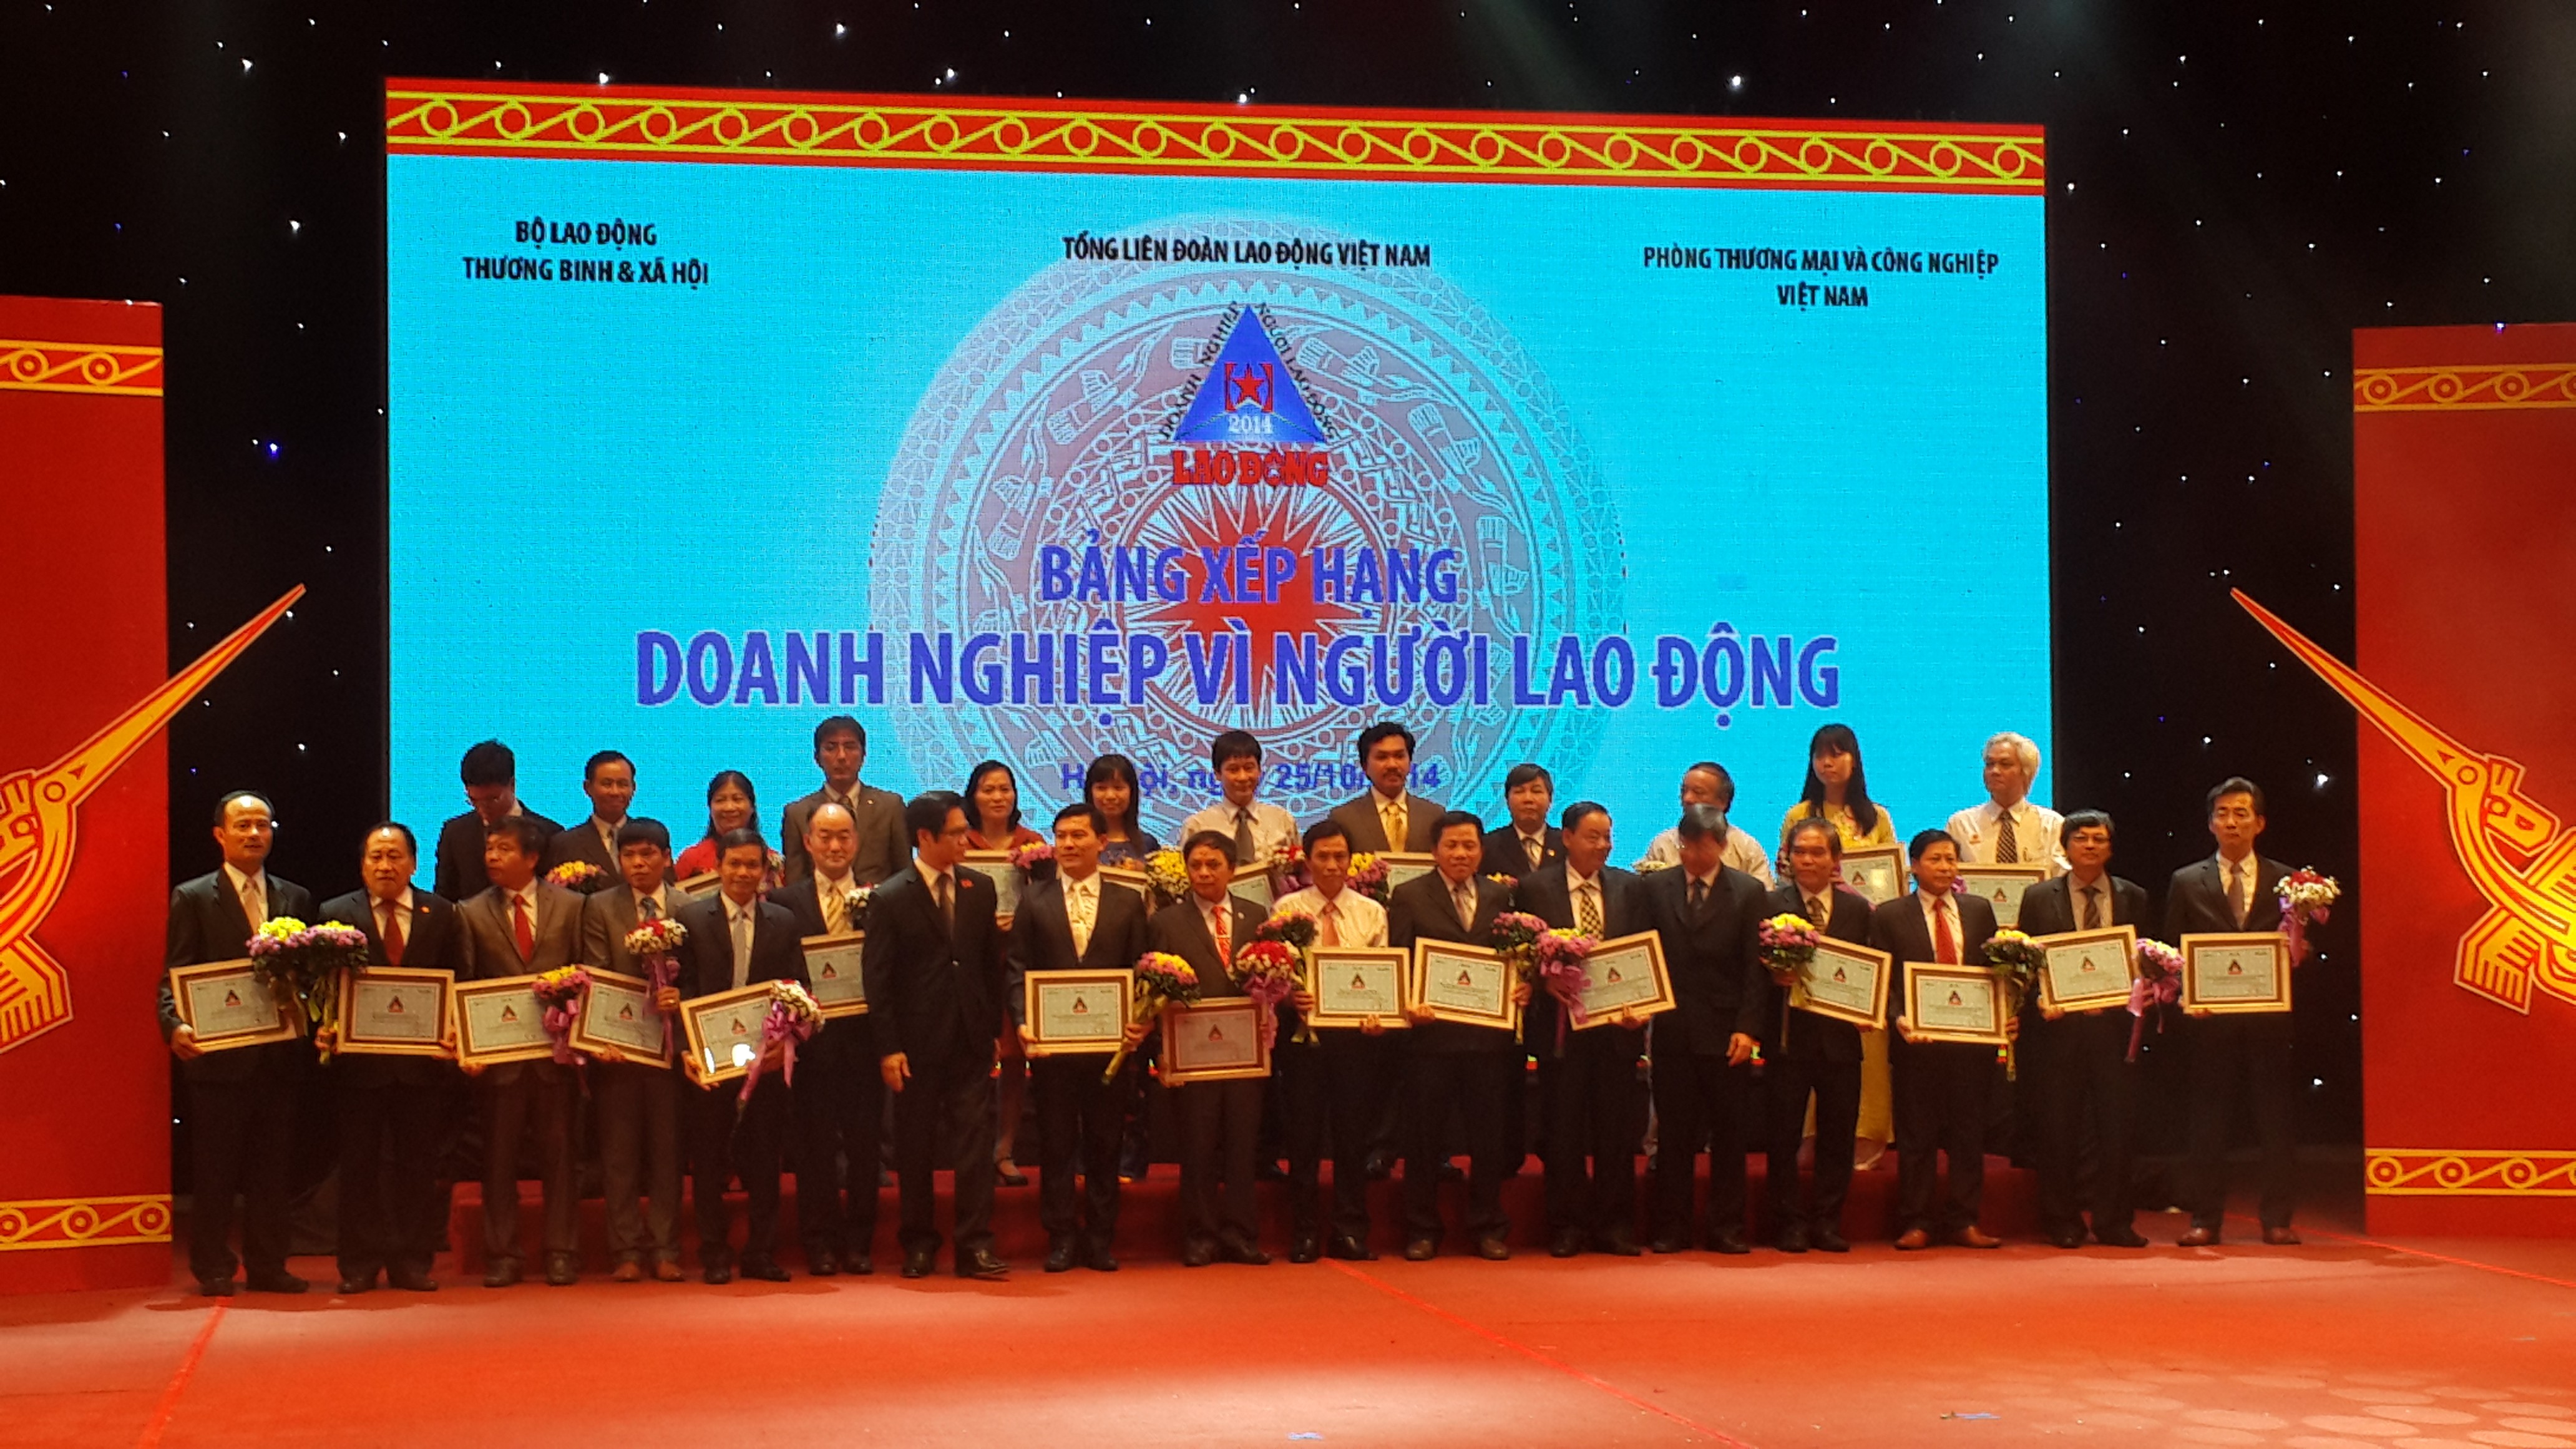 “GOOD ENTERPRISE FOR LABORER” AWARD WAS OBTAINED BY GSV